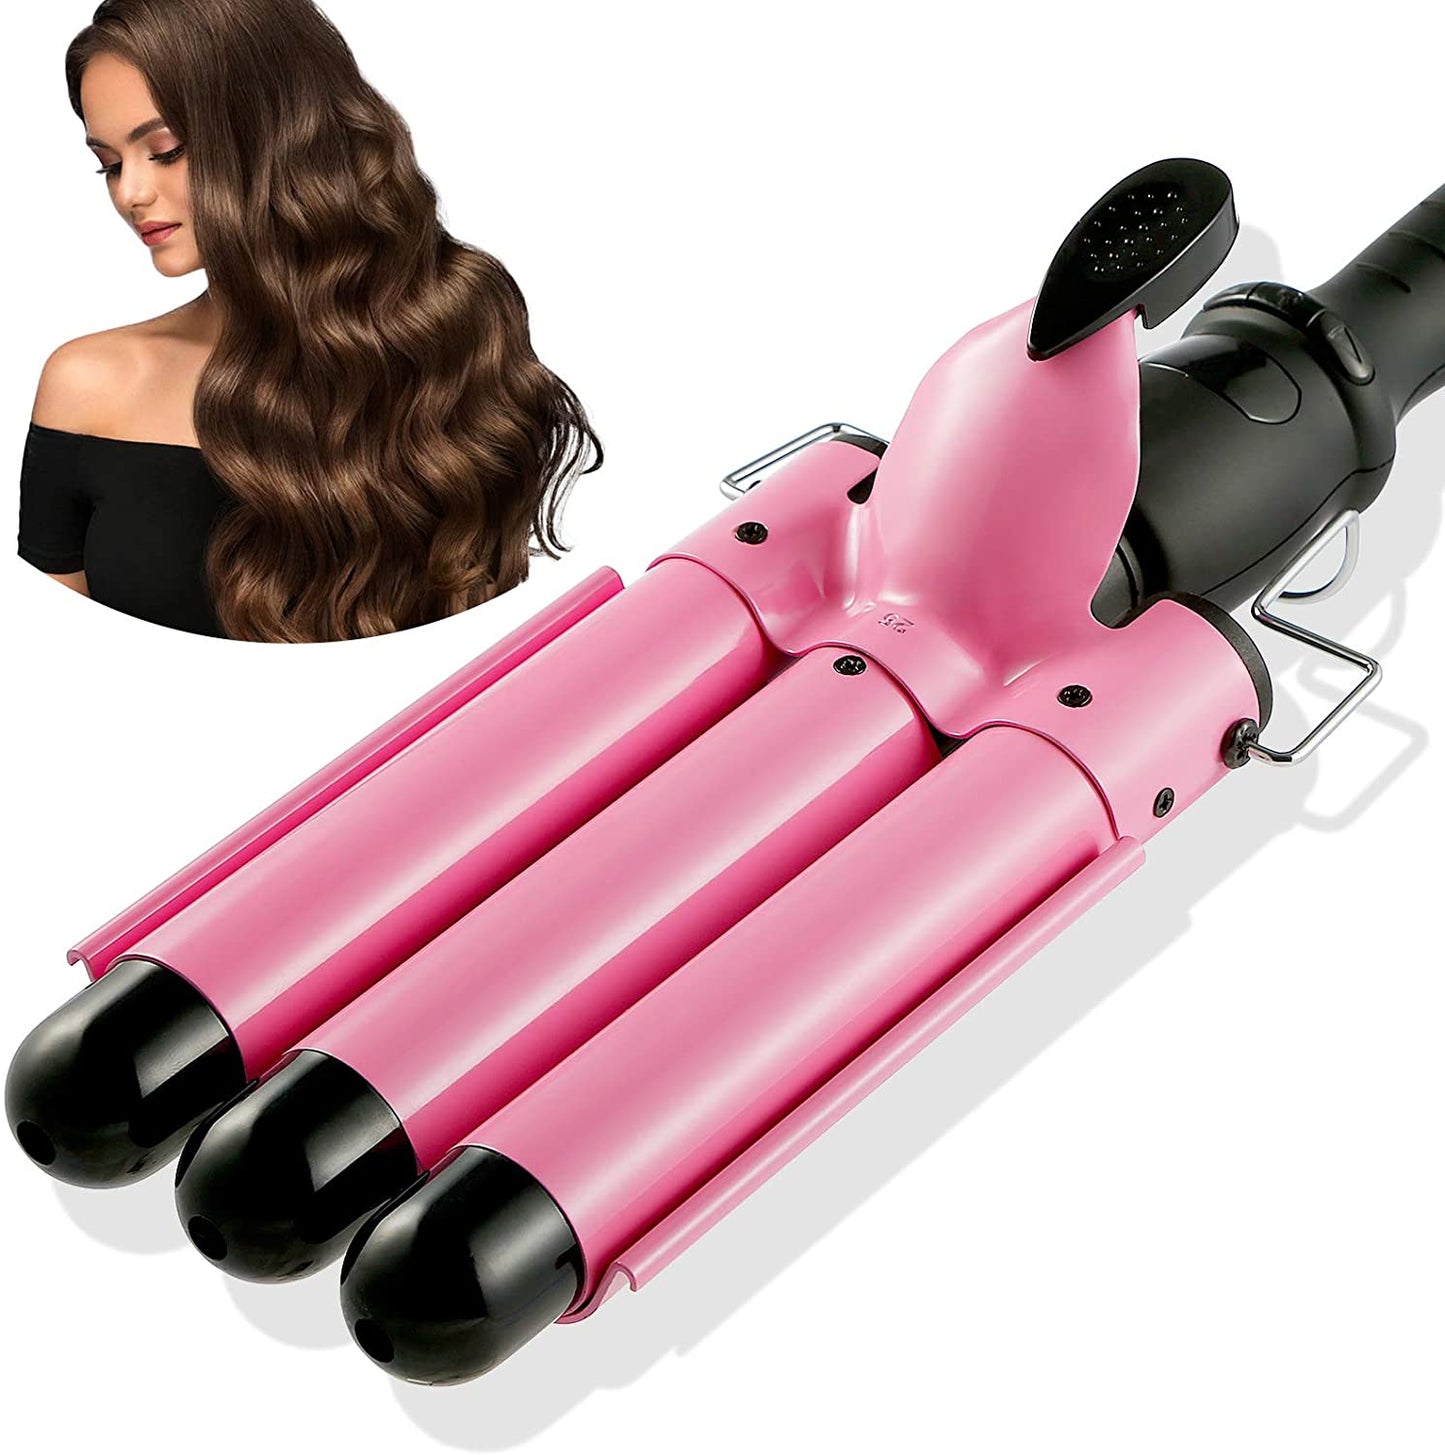 80-210℃ (176-410℉) Professional Salon Grade 3 Barrel Ceramic Curling Iron, with LCD Temp Display, 1 Inch Ceramic Hair Wave Iron - Home Decor Gifts and More